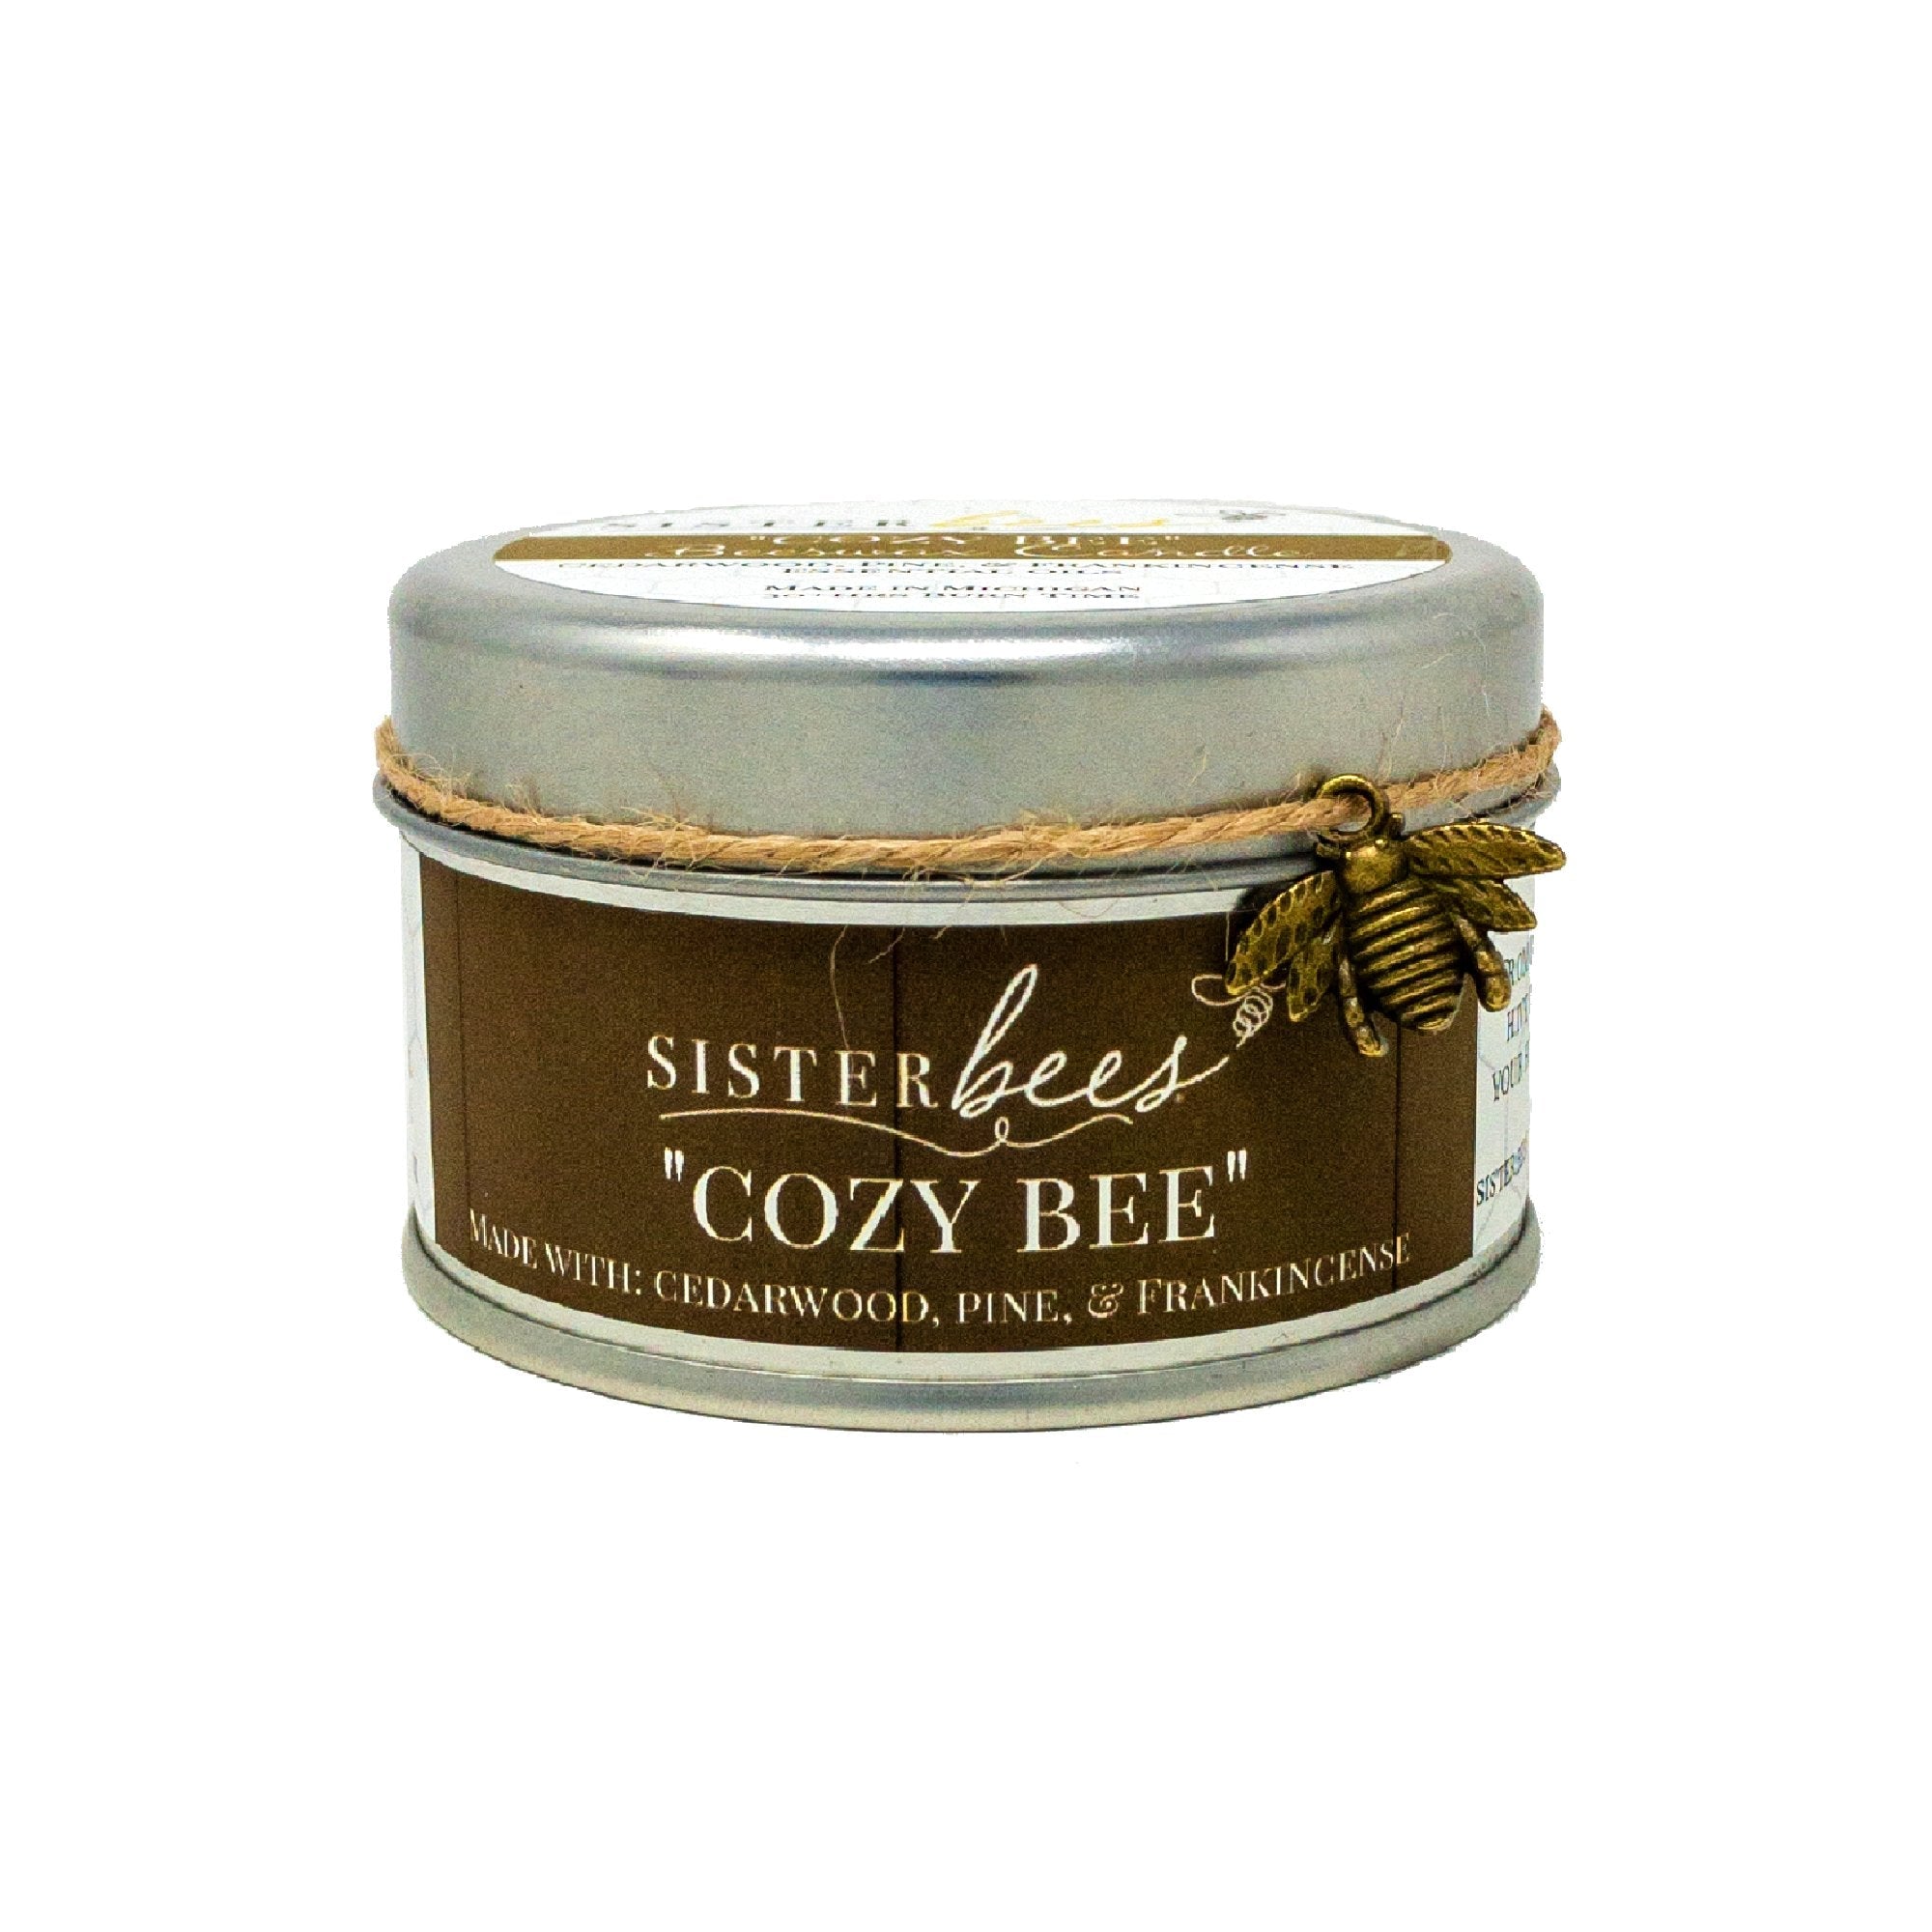 Beeswax Candle - Cozy Bee (with Cedarwood, Pine, & Frankincense) - SuperMom Headquarters